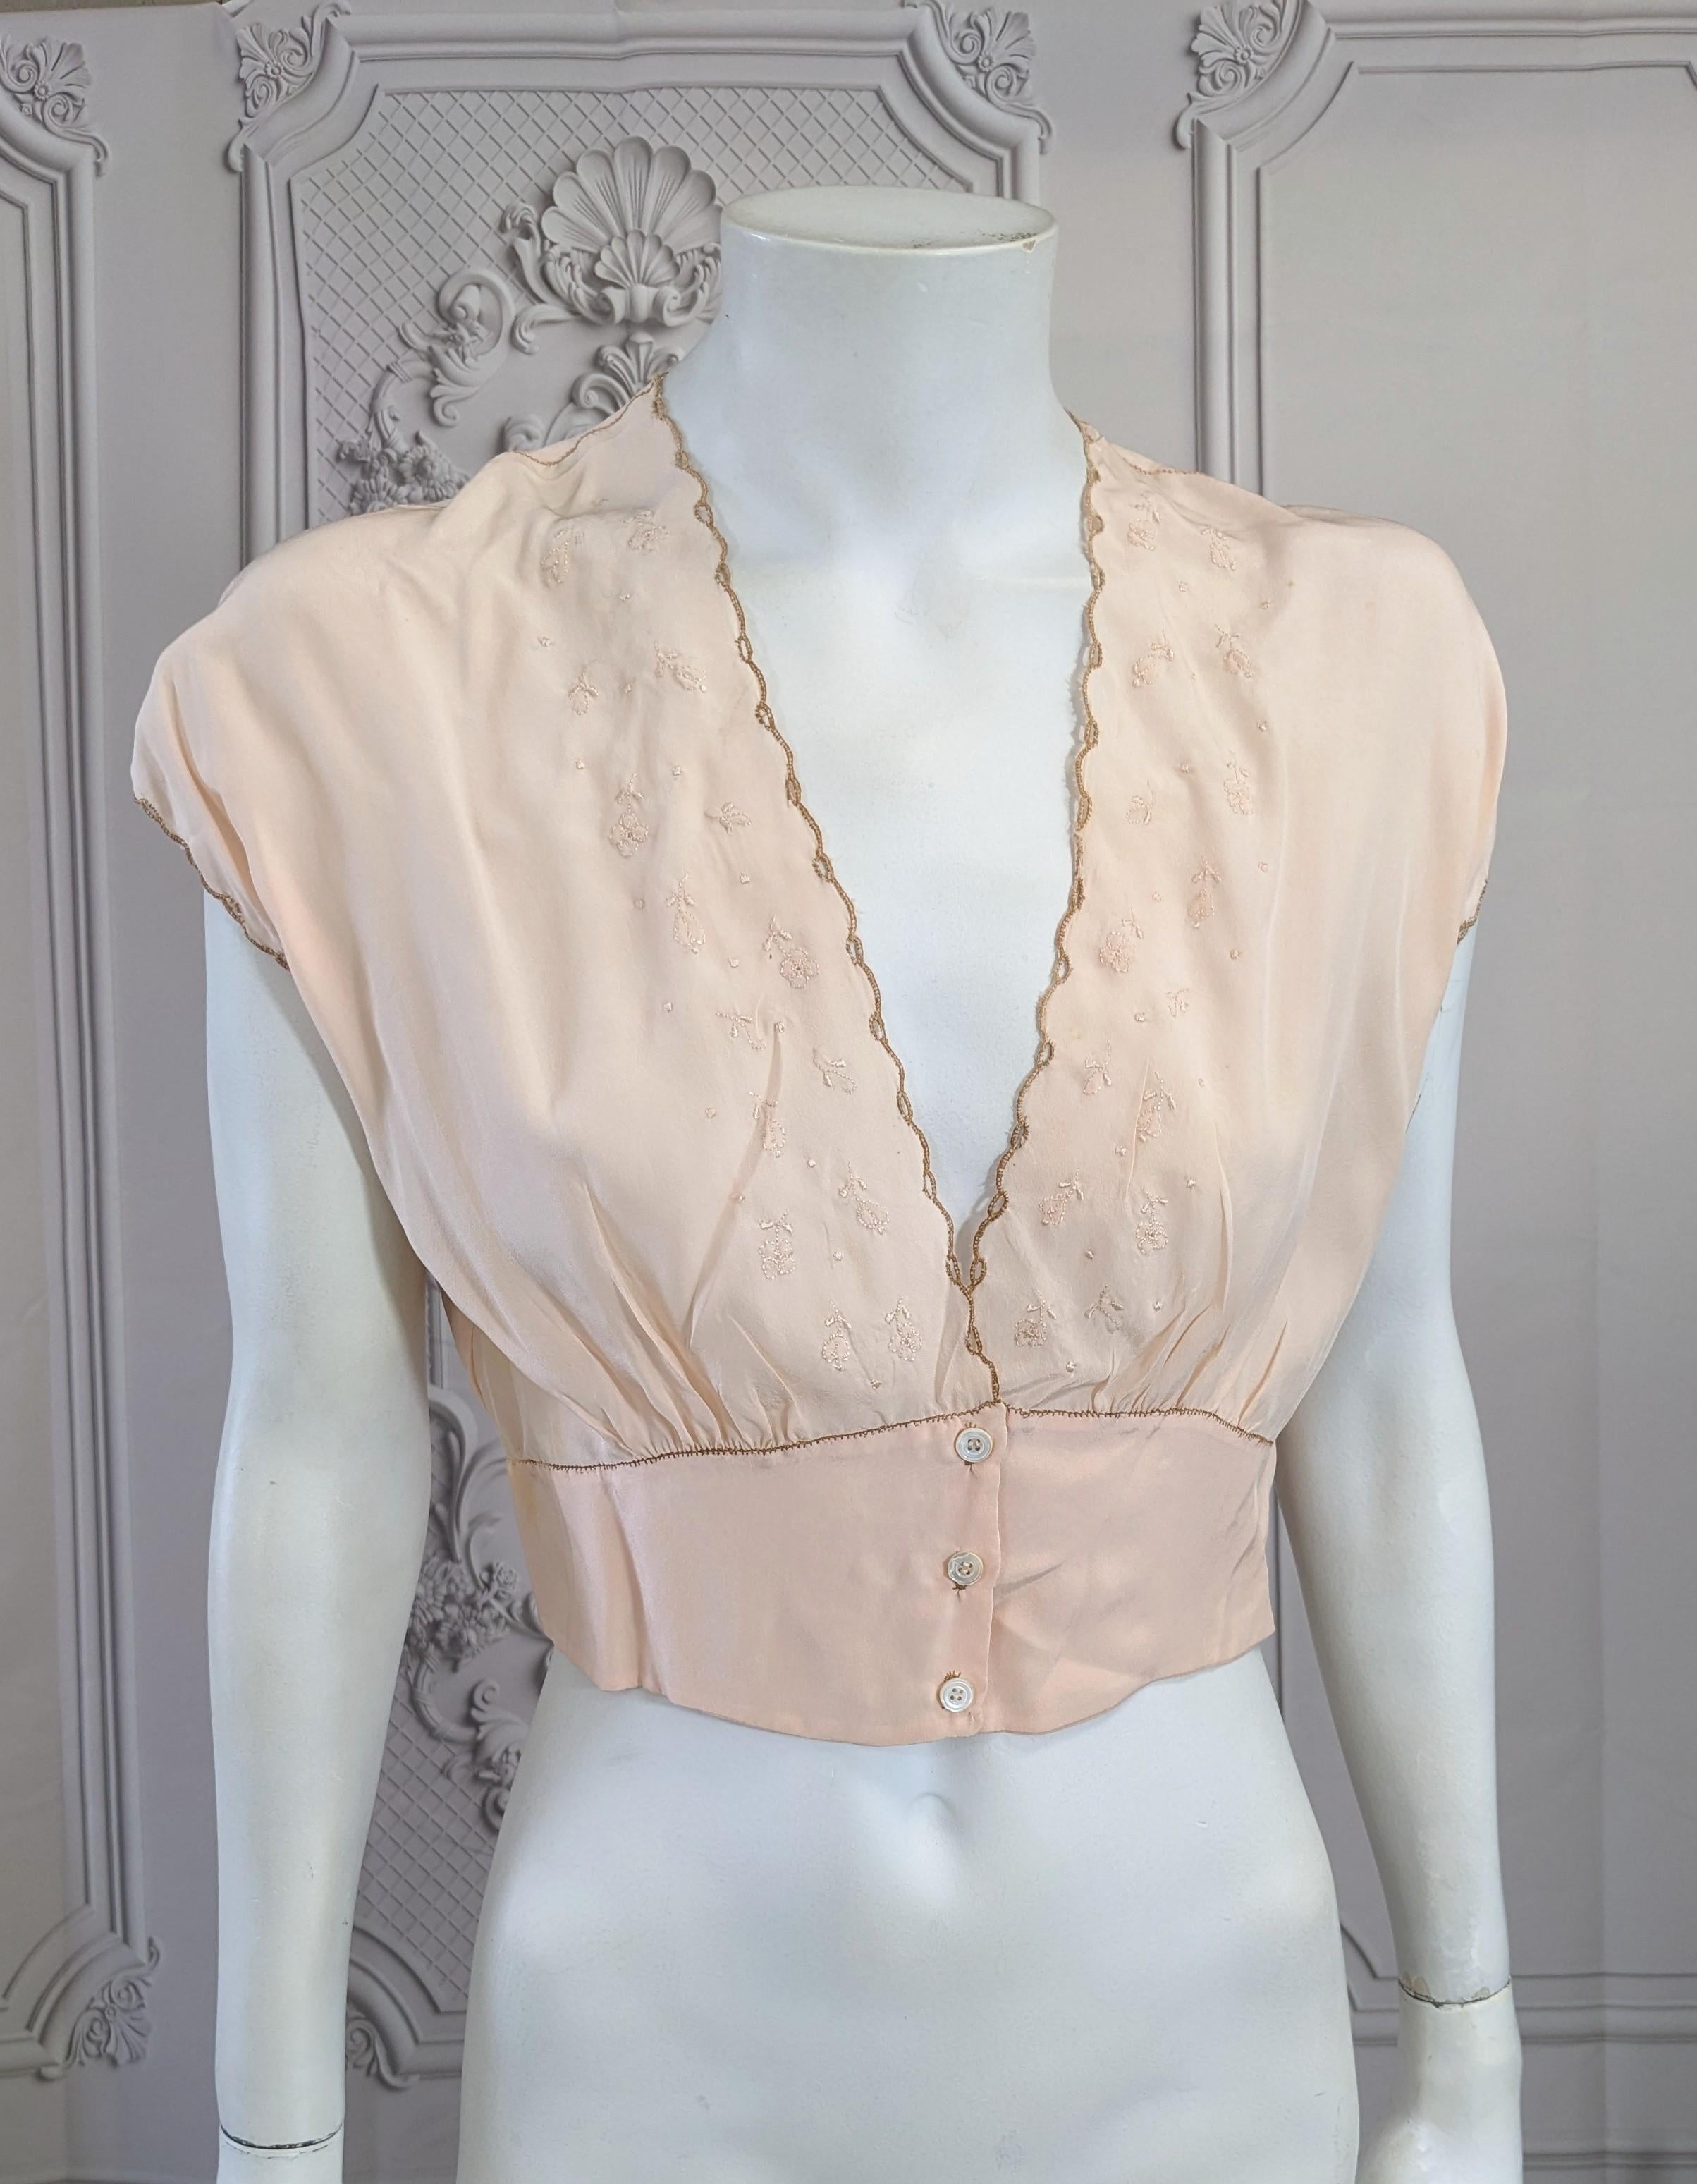 Upcycled Silk Crepe Art Deco Top by Studio VL. Pink silk crepe lingerie top with floral embroidery down front to 3 mother of pearl buttons. We have added a young wide eyed girl, who has your back, both figuratively and literally. Hand embroidered